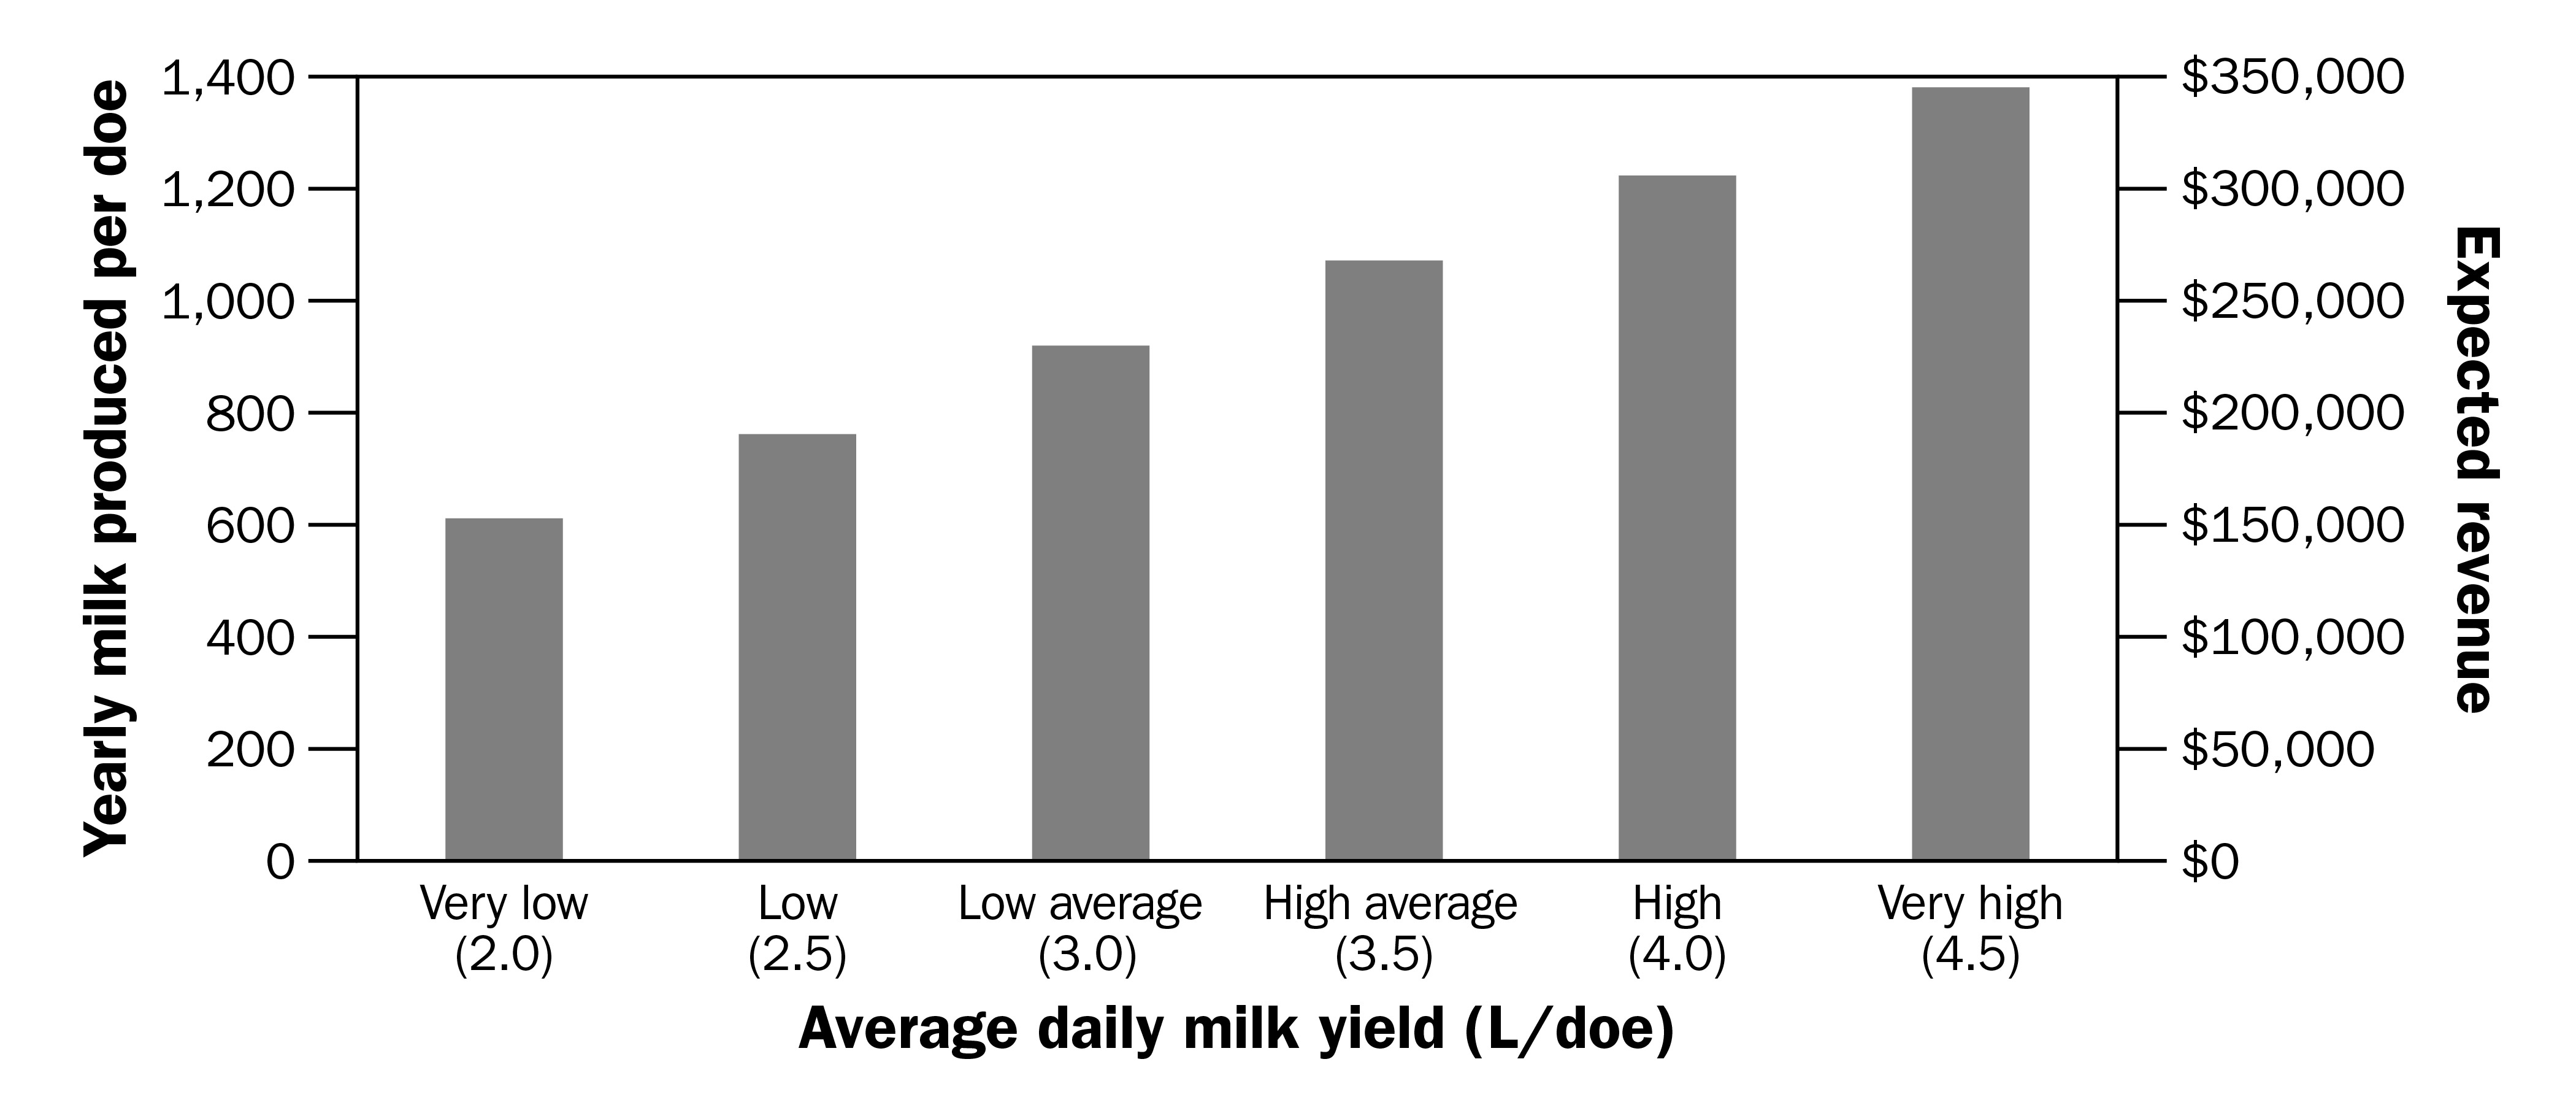 Bar graph with yearly milk produced per doe on the left axis from 200 to 1,400. Expected revenue on the right axis from $0 to 350,000 and average daily milk yield from very low on the left to very high on the right.